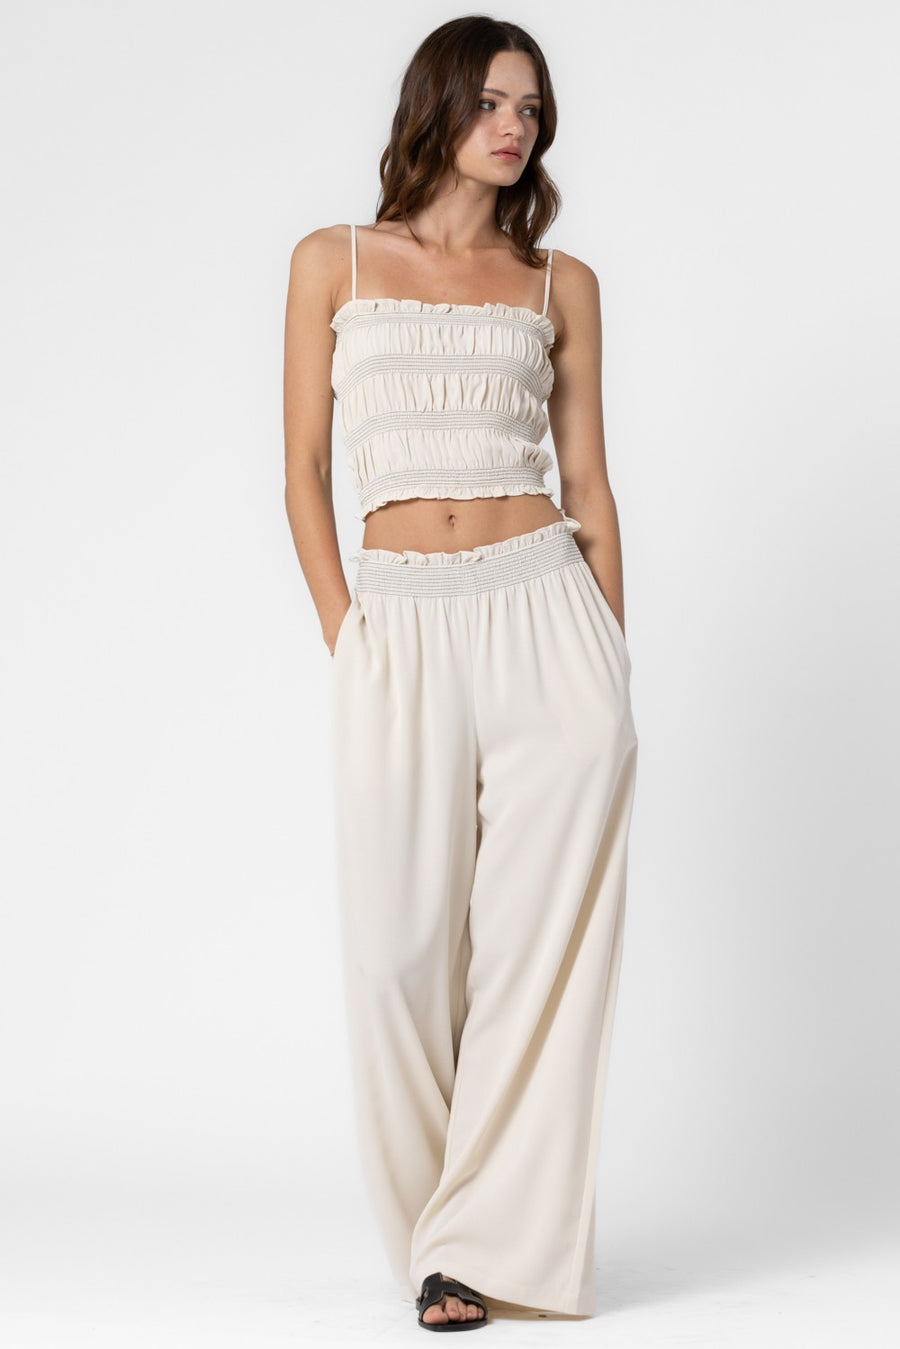 Wide leg, loose fit pants with elastic waistband and ruffle details.